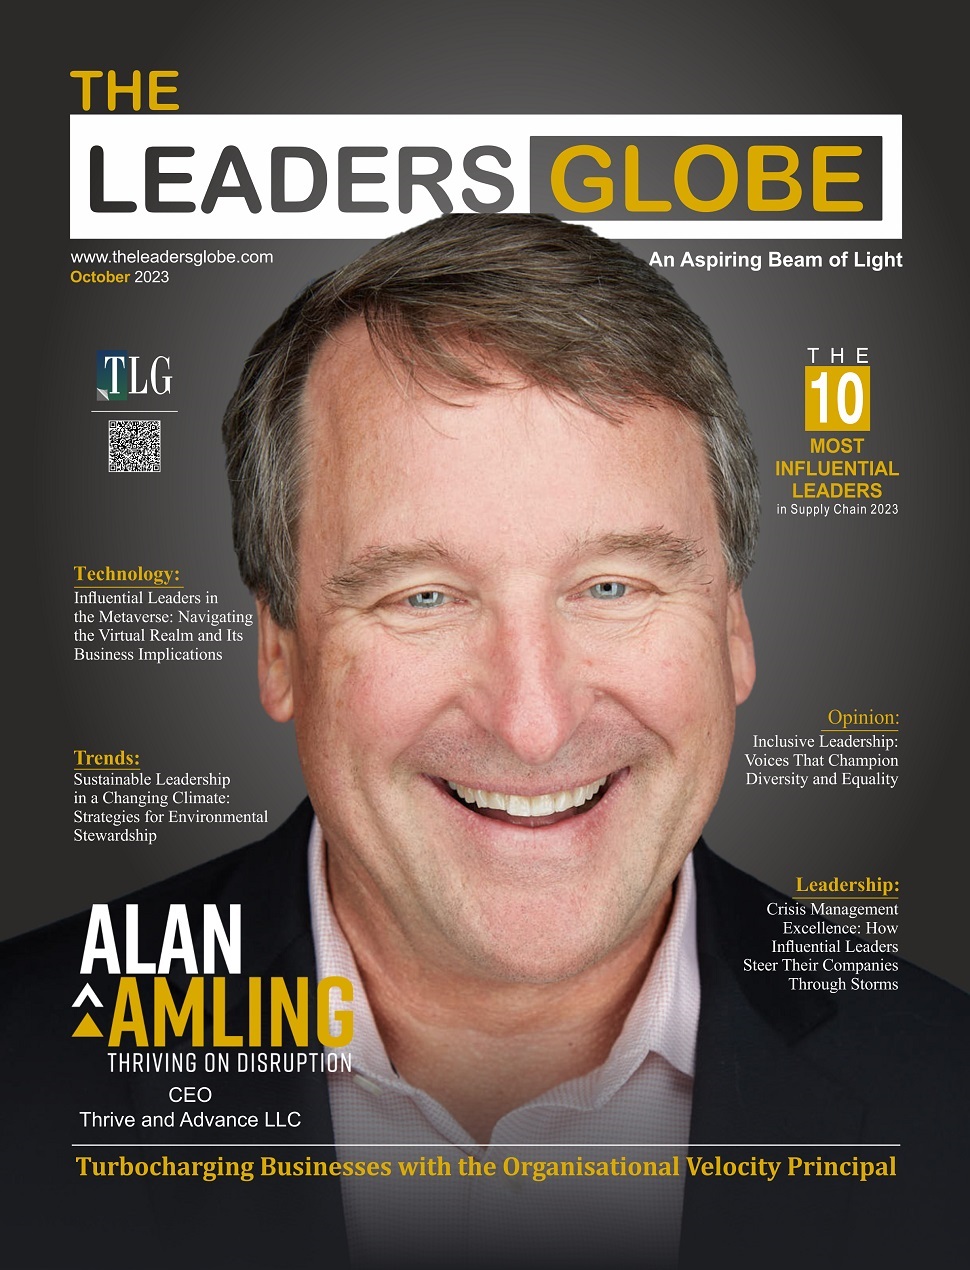 The 10 Most Influential Leaders in Supply Chain 2023